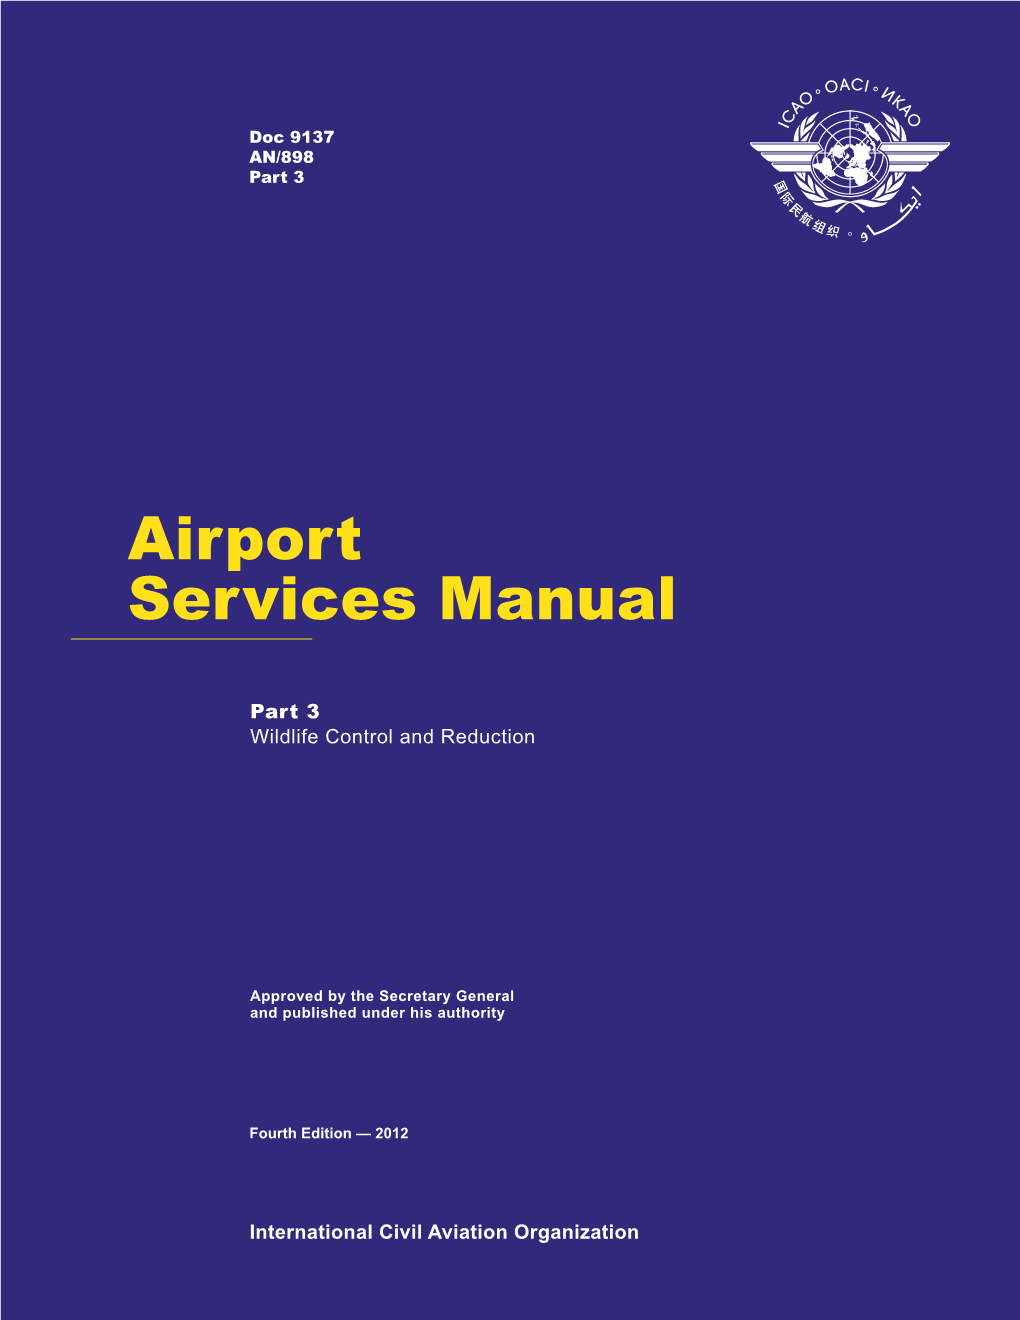 Airport Services Manual